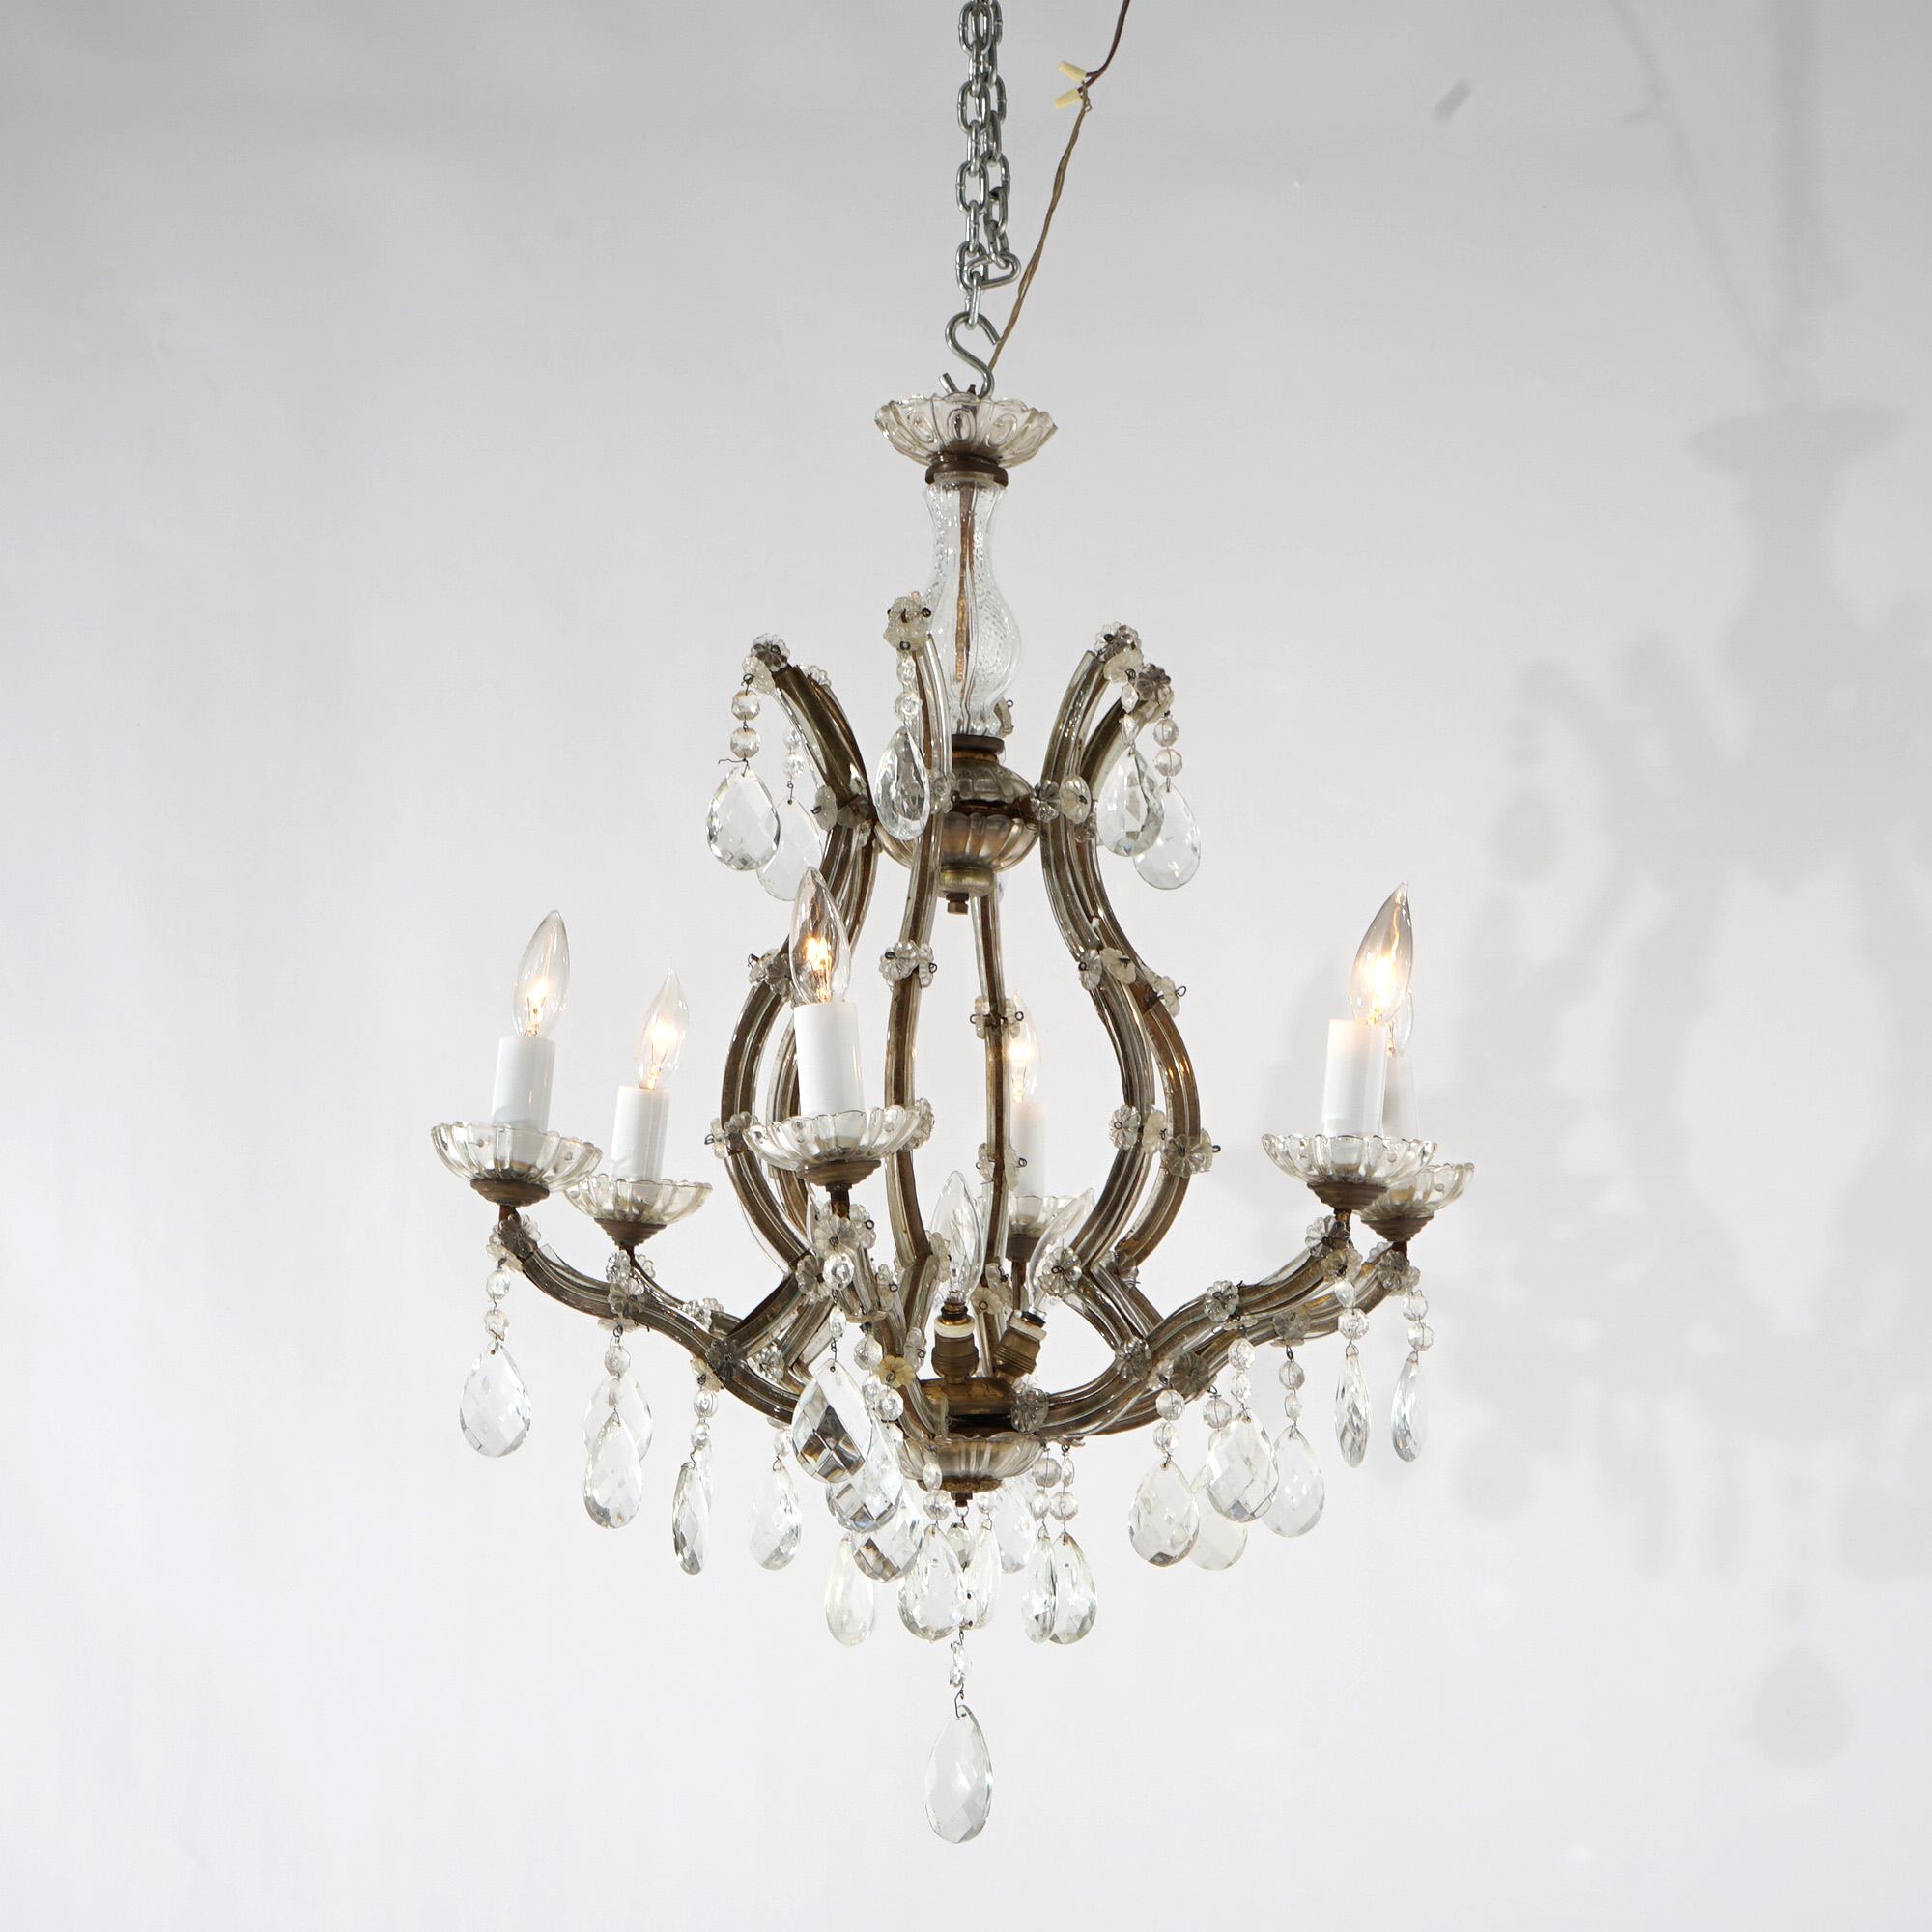 An antique French style chandelier offers gilt metal scroll form frame with arms terminating in candle lights and having crystal highlights throughout, c1940

Measures - 27